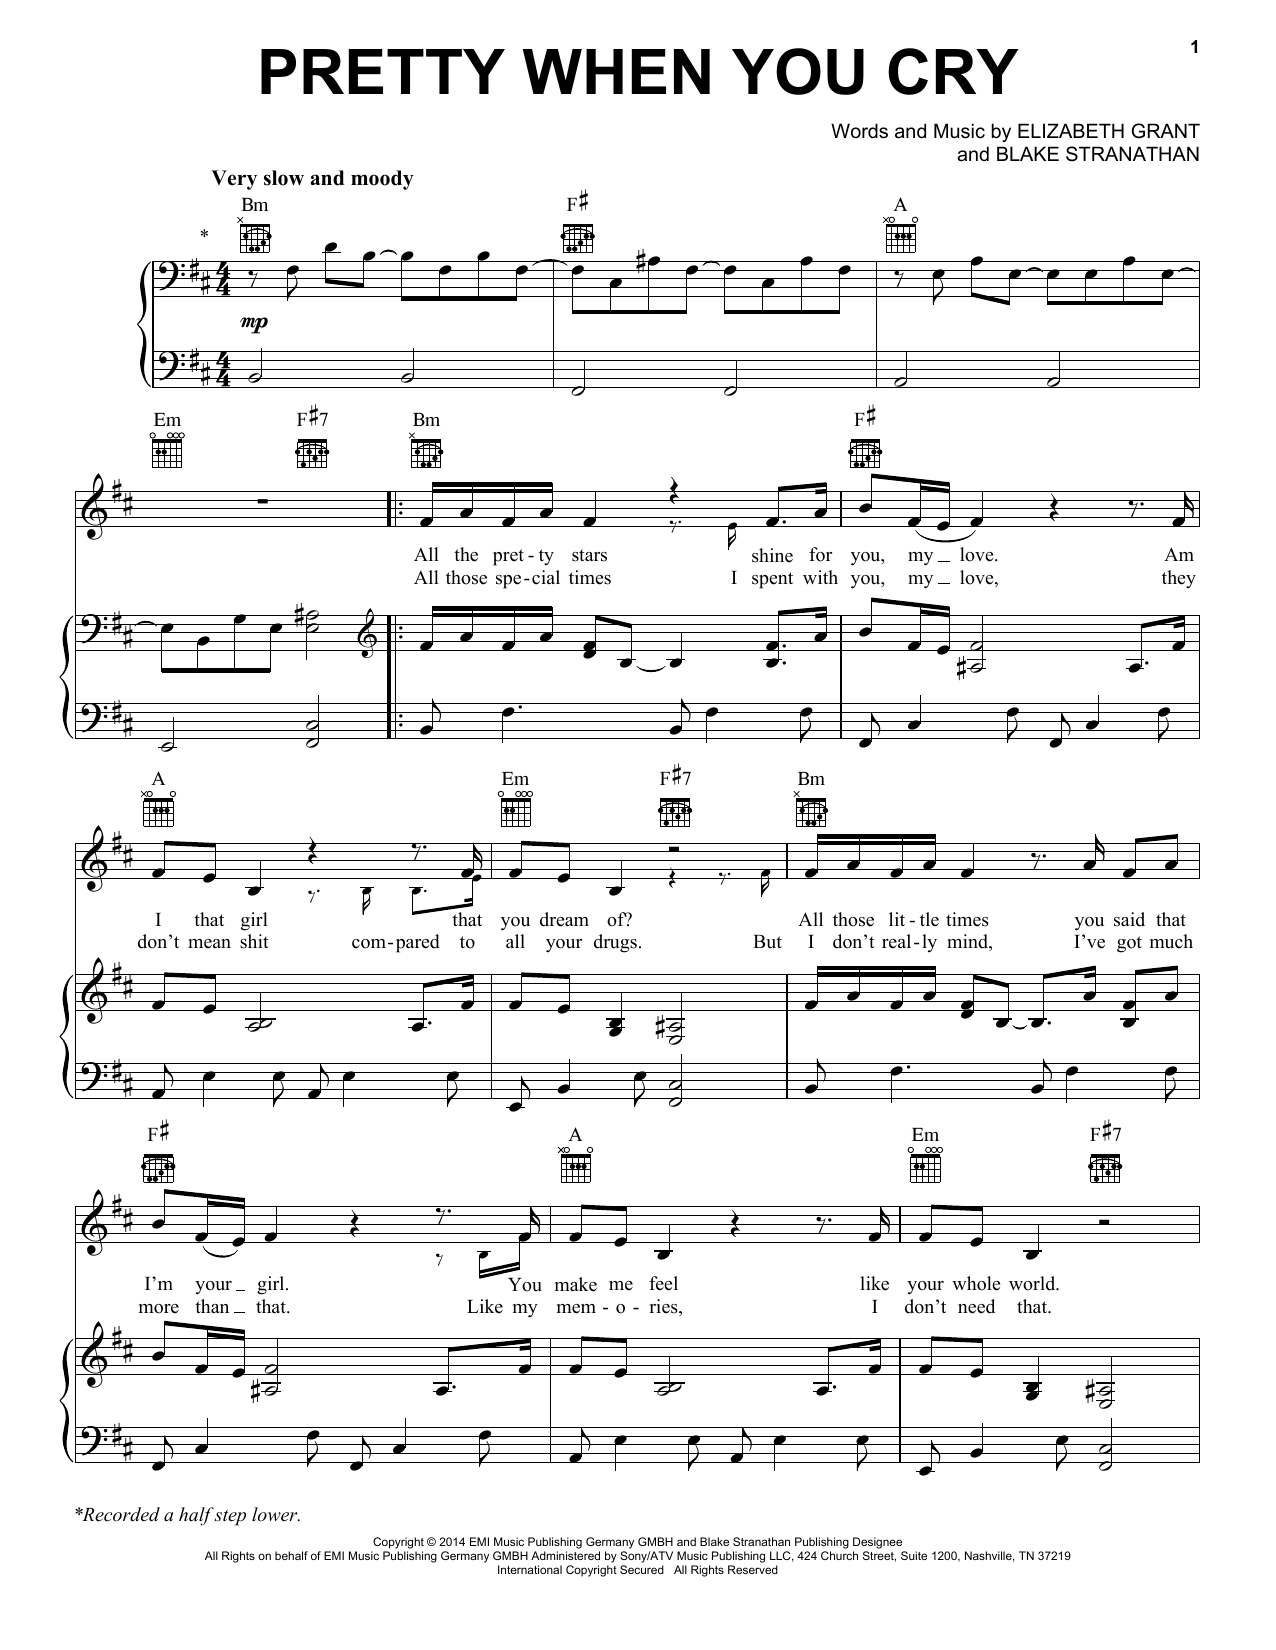 Download Lana Del Rey Pretty When You Cry Sheet Music